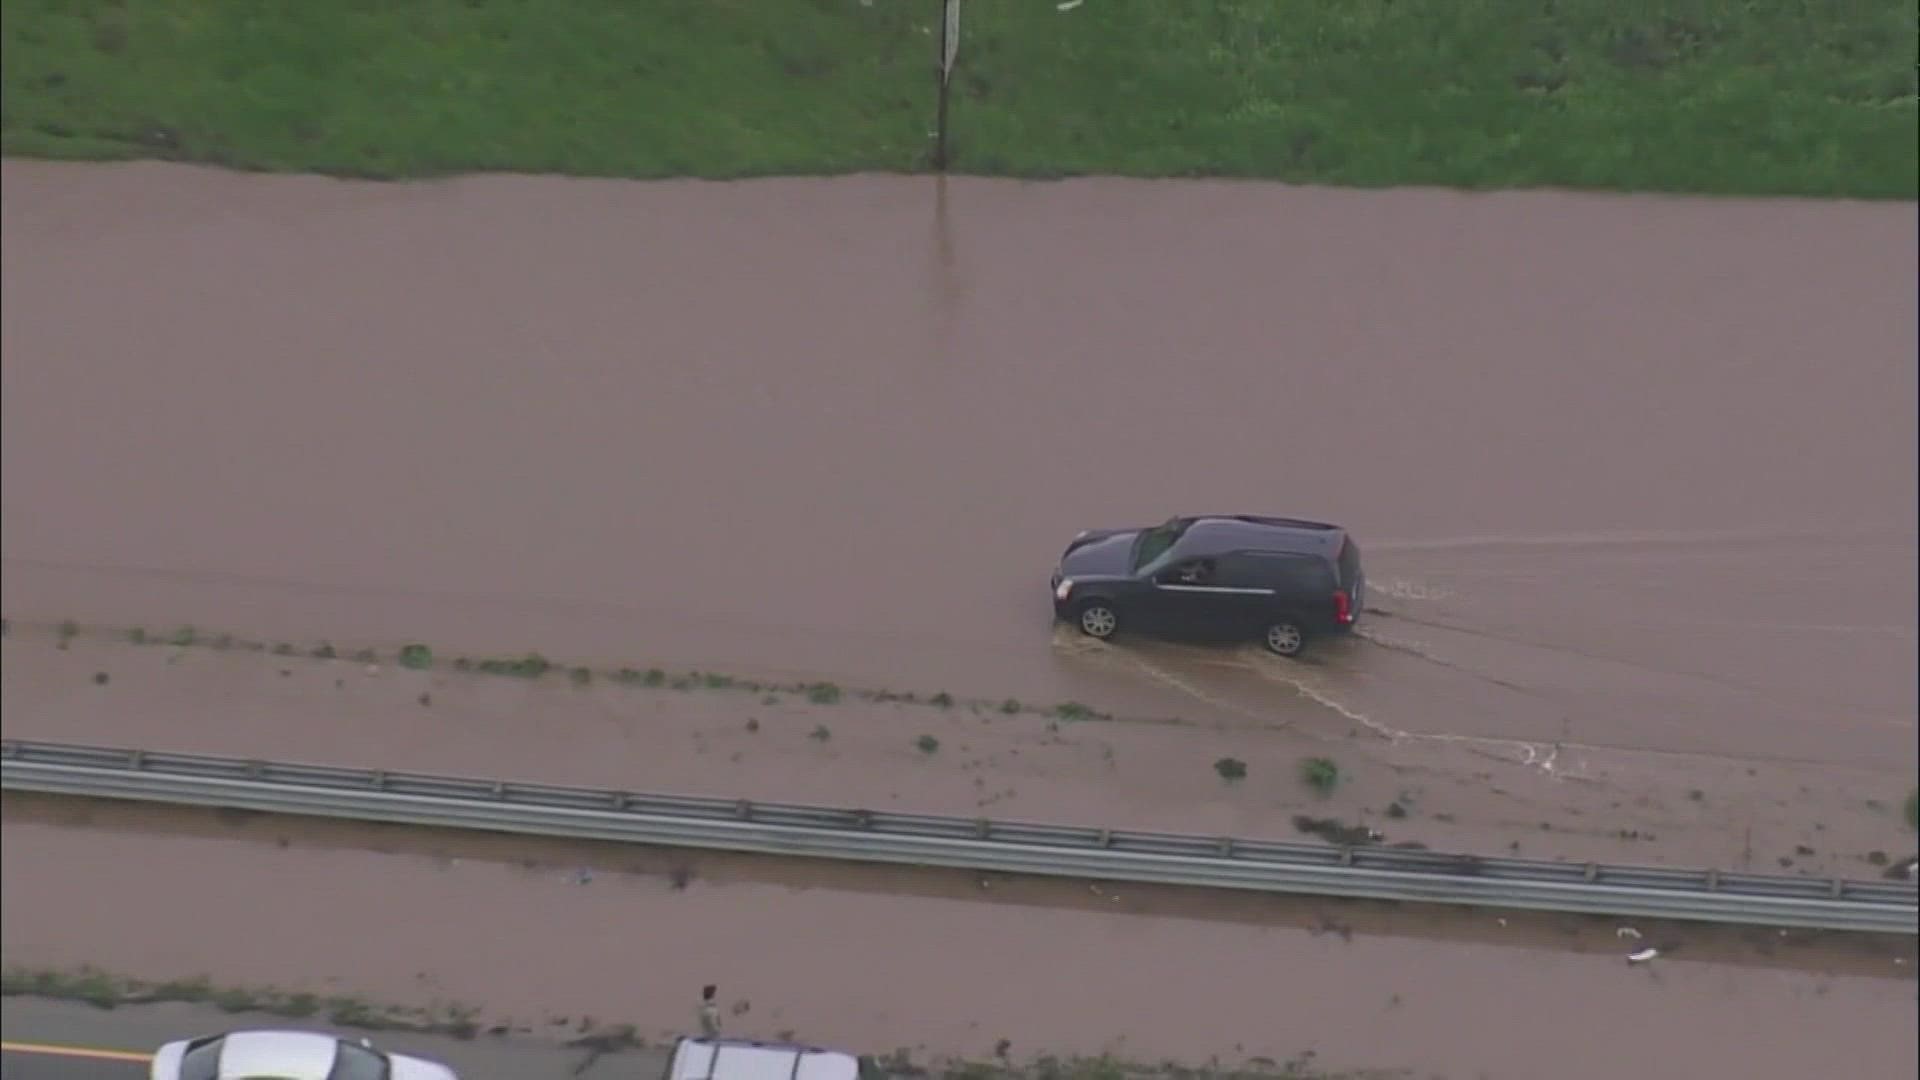 Relentless rain continues to pound California, causing dangerous flooding.